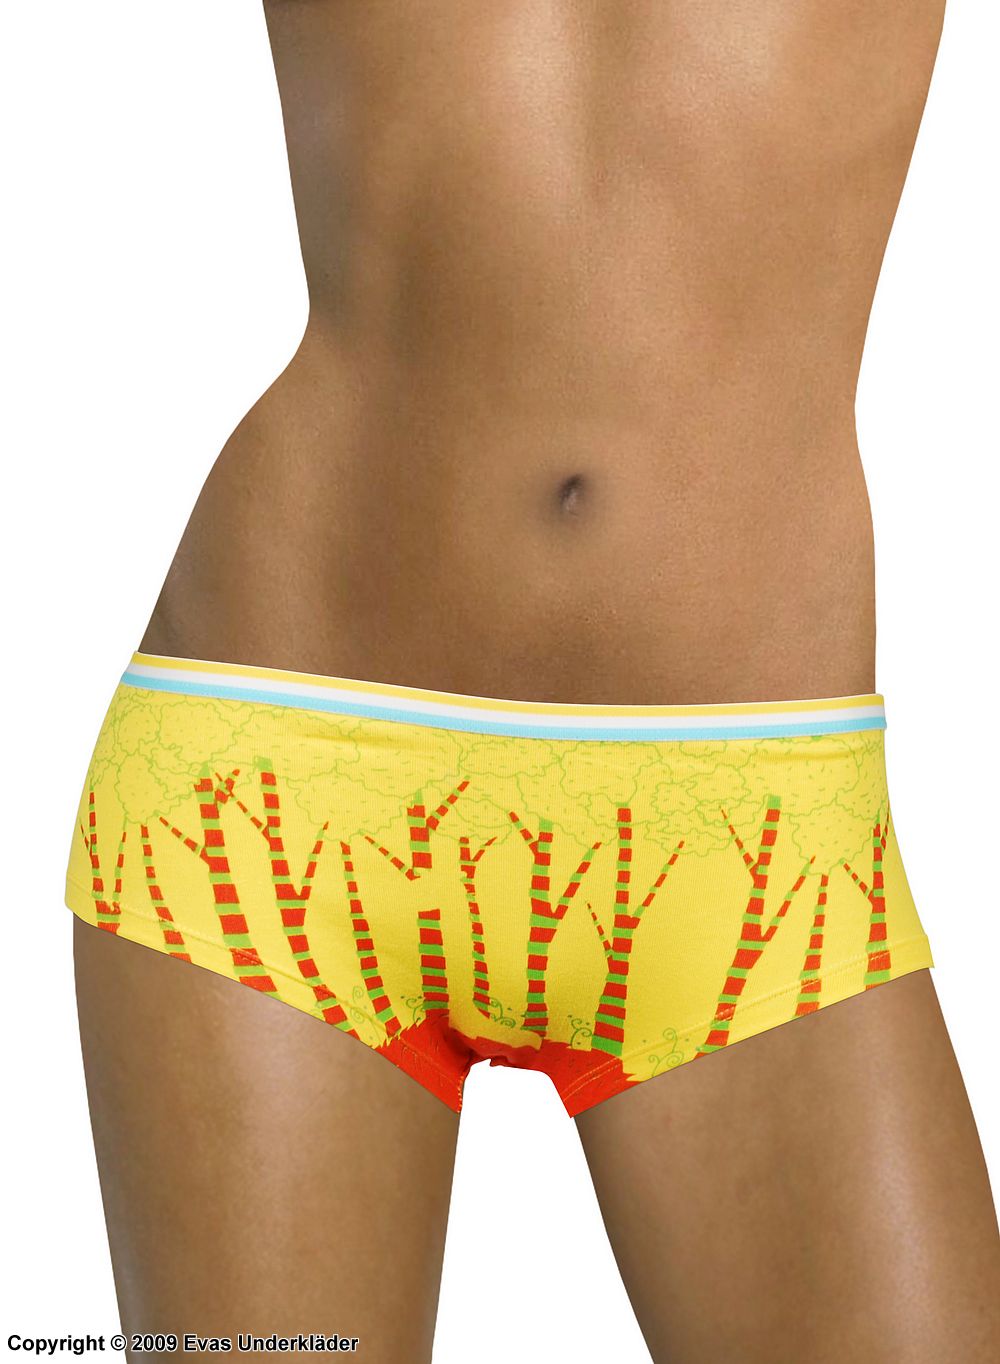 Hipster panty with trees